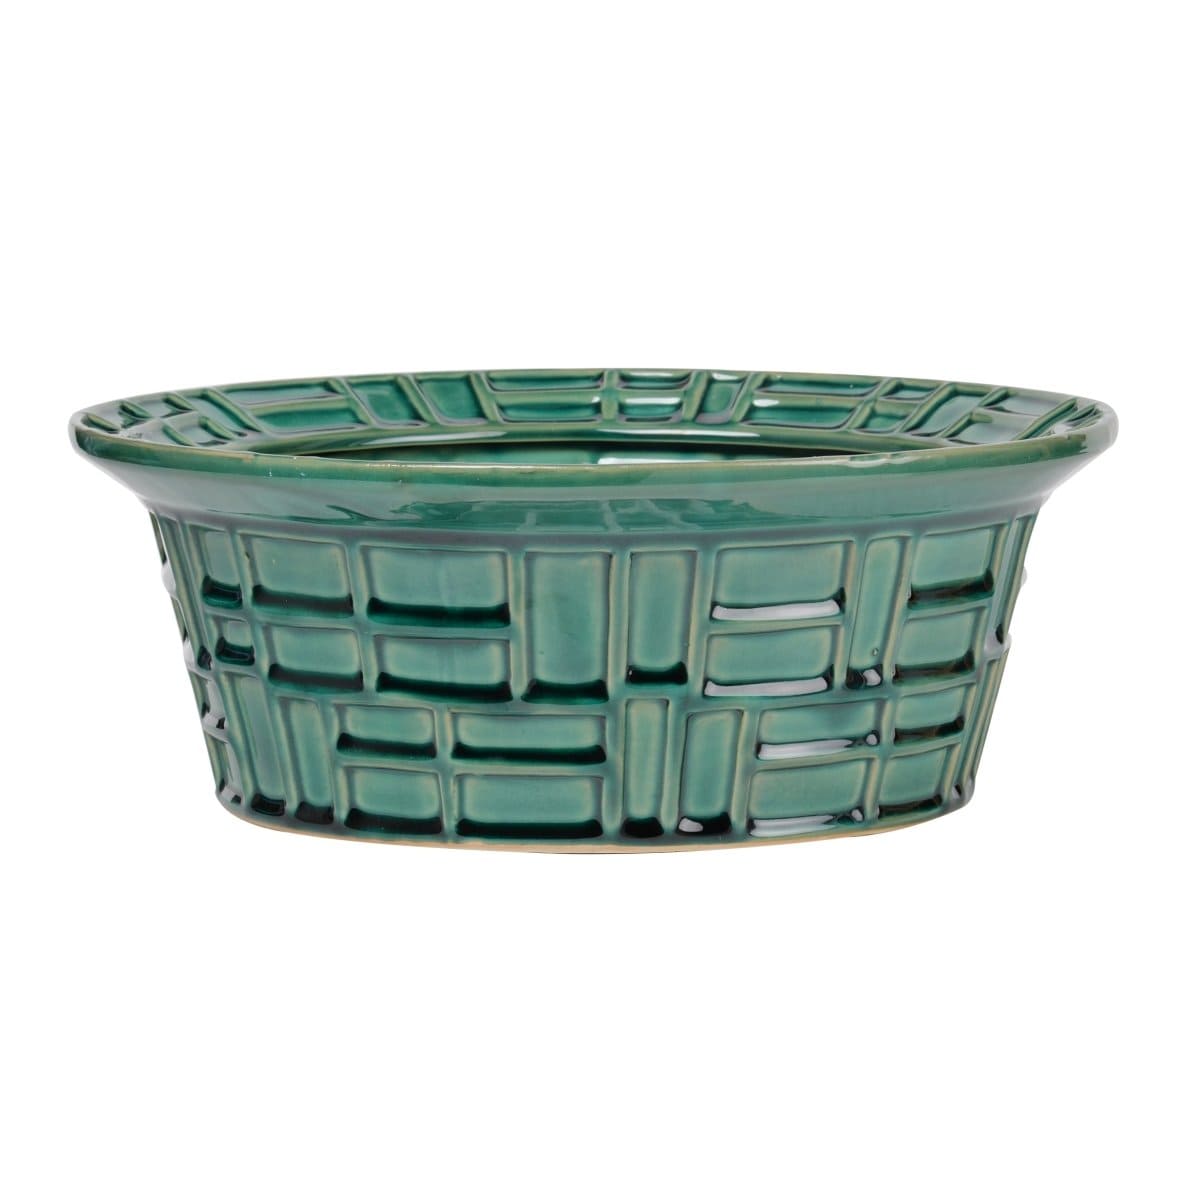 AB-AV1600 Tibal Winds Bowl with Stand picket and rail